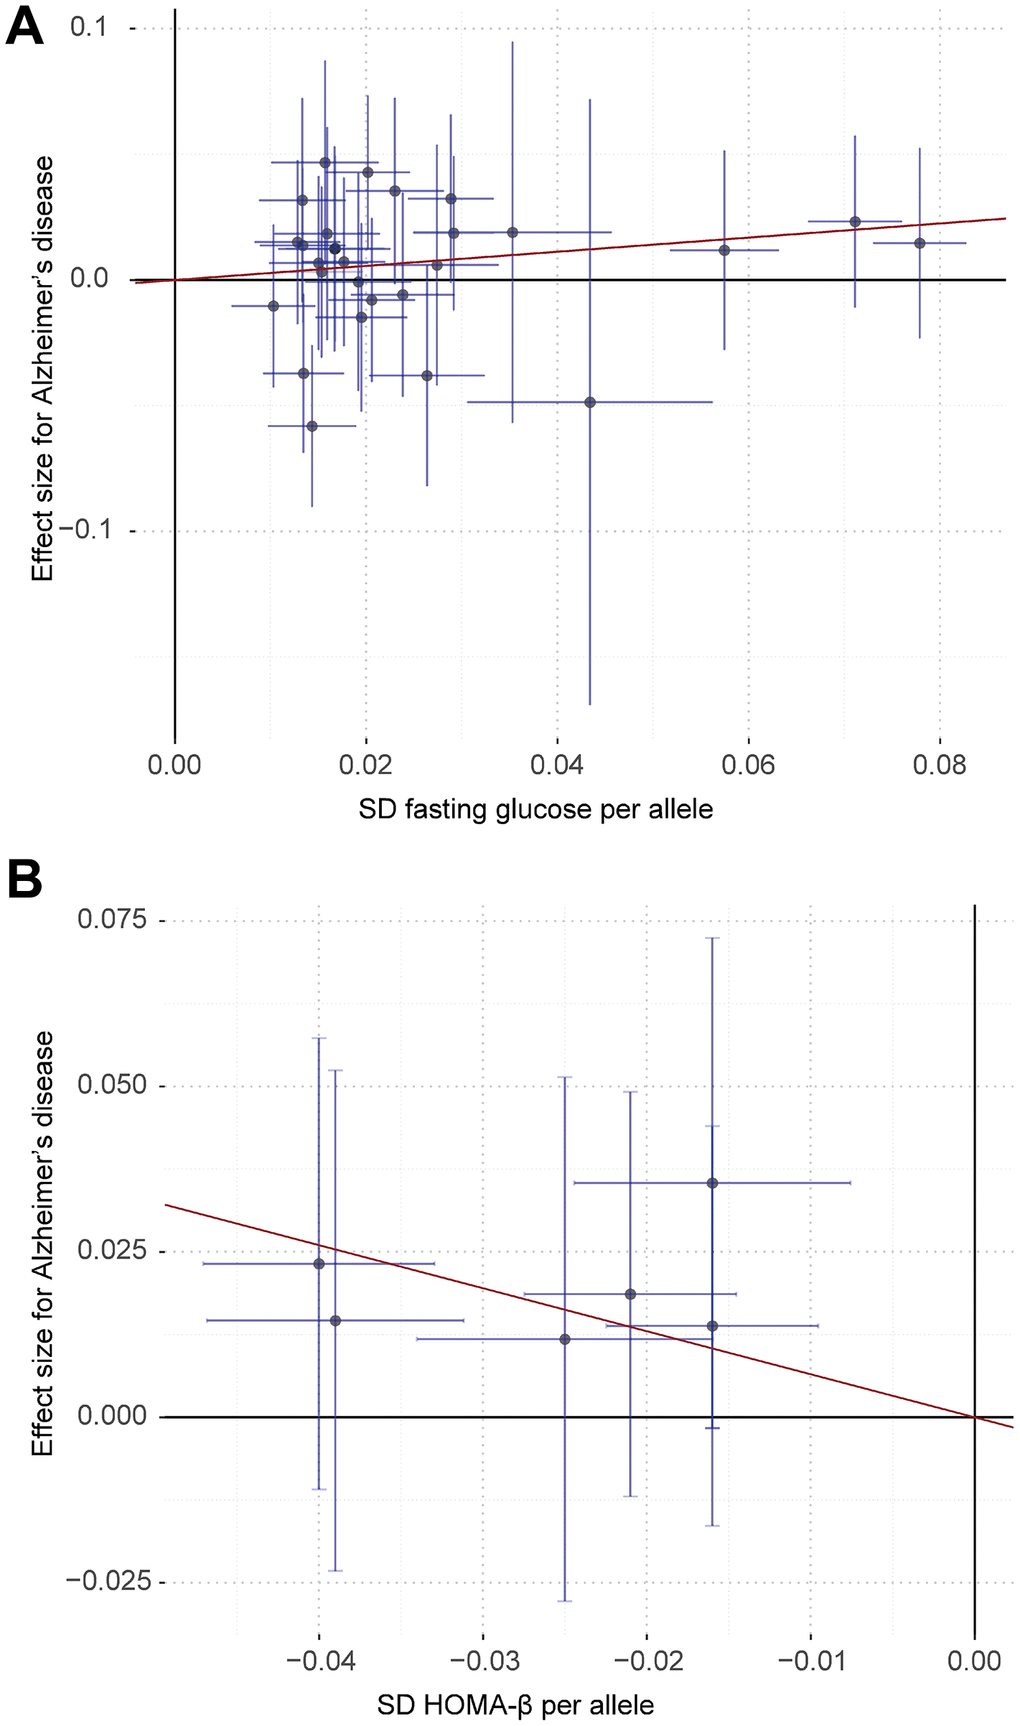 Associations of fasting glucose (A) and HOMA-β (B) related variants with risk of Alzheimer’s disease. The red line indicates the estimate of effect using inverse-variance weighted method. Circles indicate marginal genetic associations between fasting glucose, HOMA-β and risk of Alzheimer’s disease for each variant. Error bars indicate 95% confidence intervals.